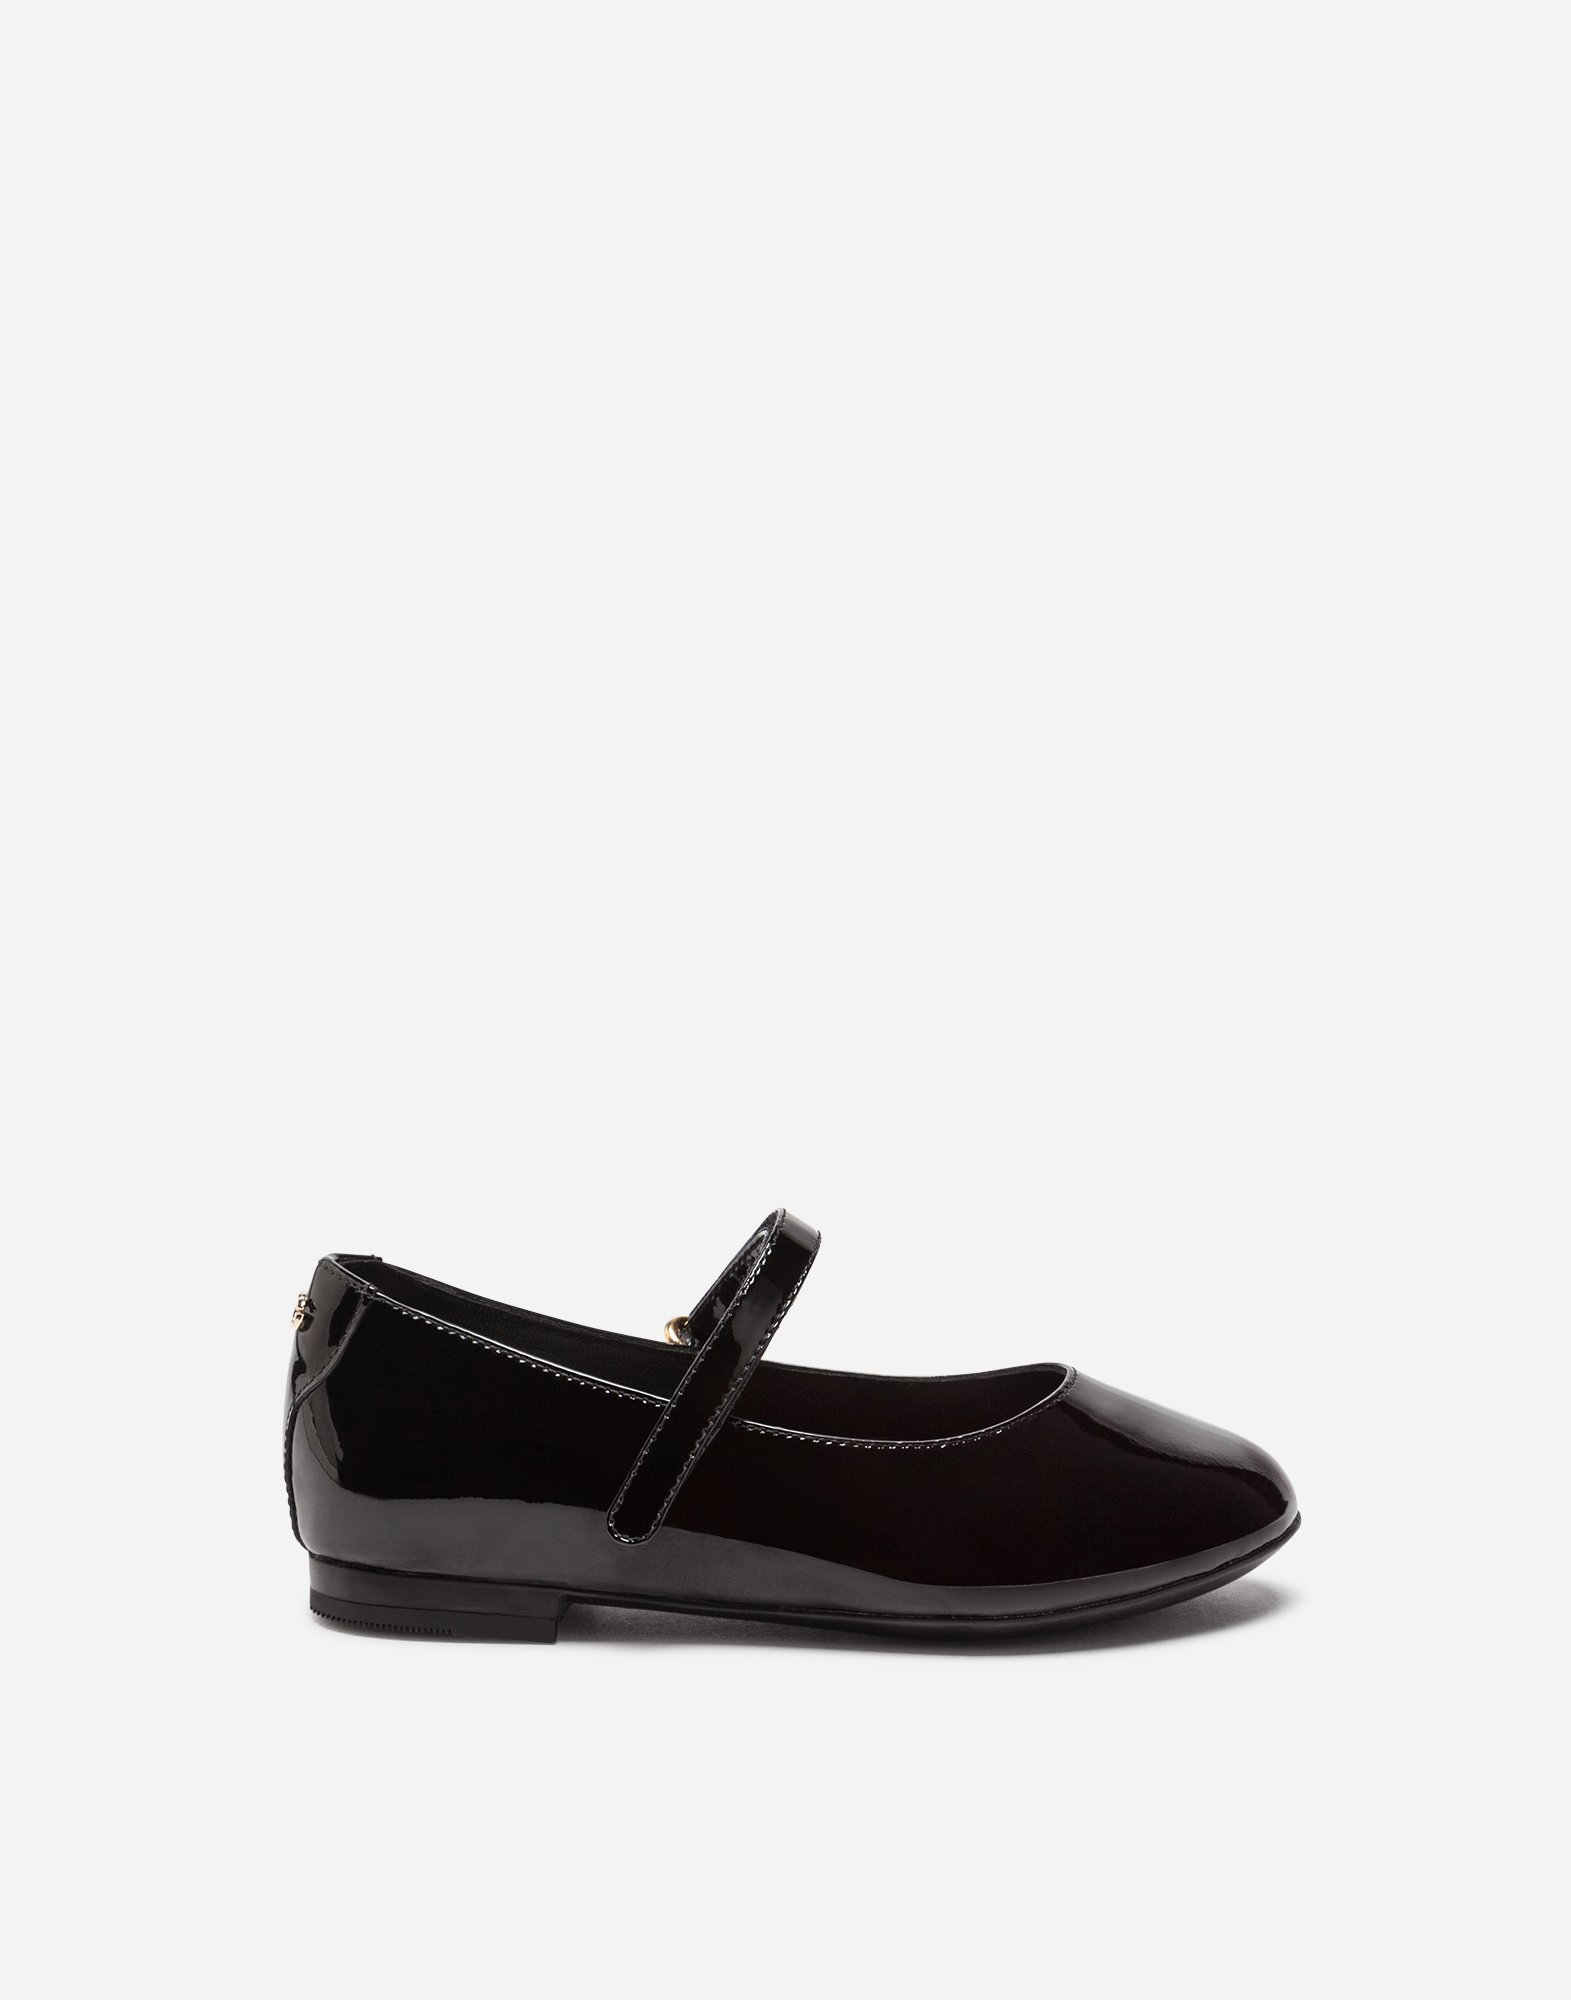 Patent leather Mary Janes  in Black